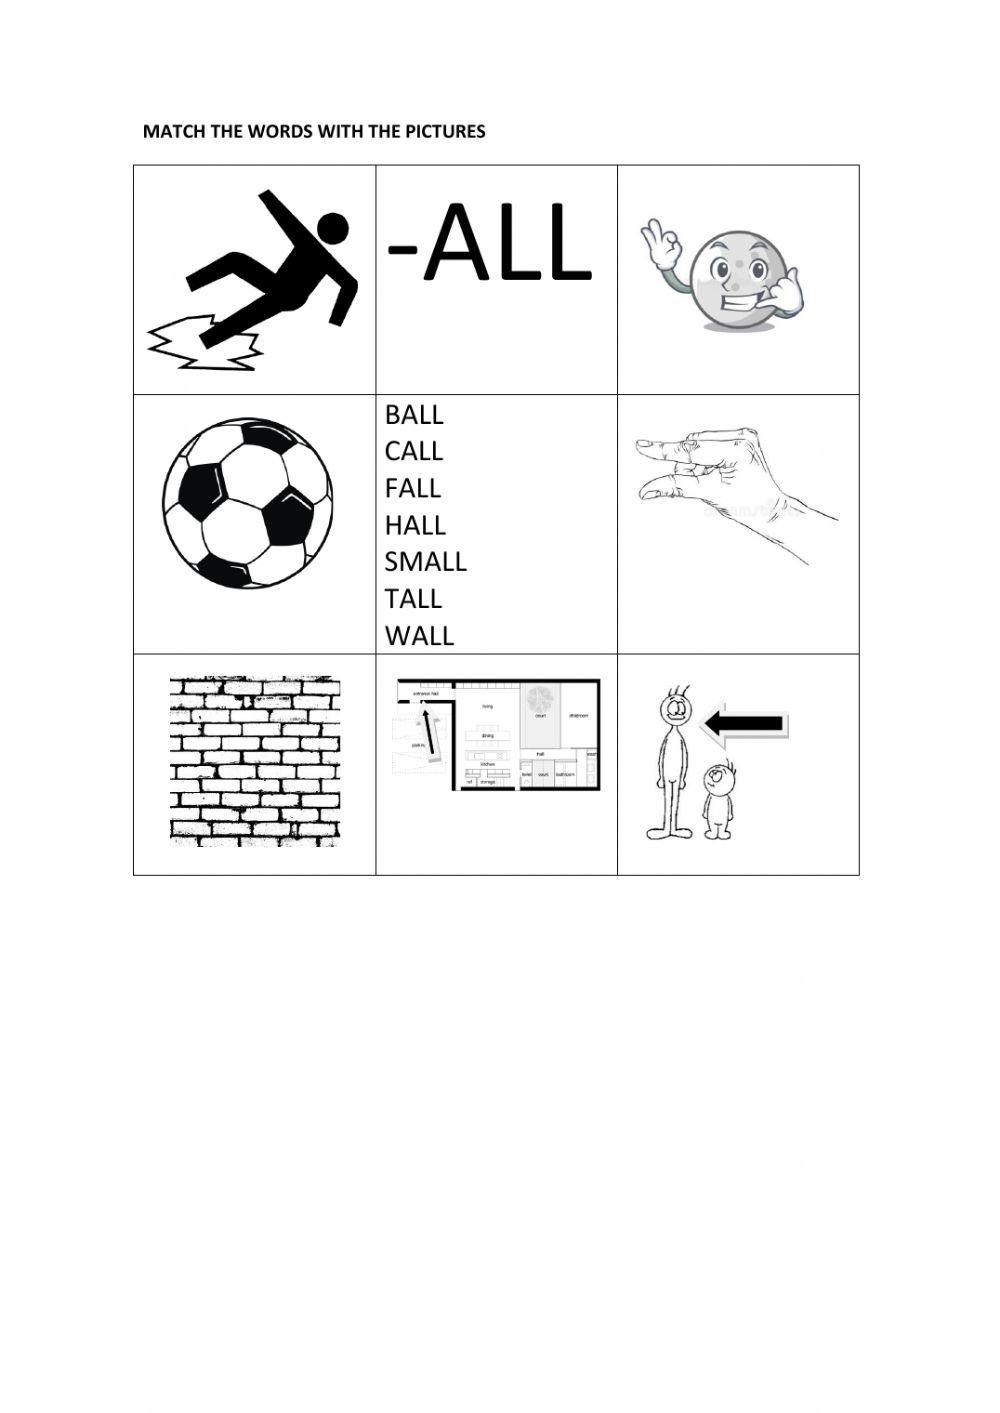 -all worksheet matching words with pictures black and white version